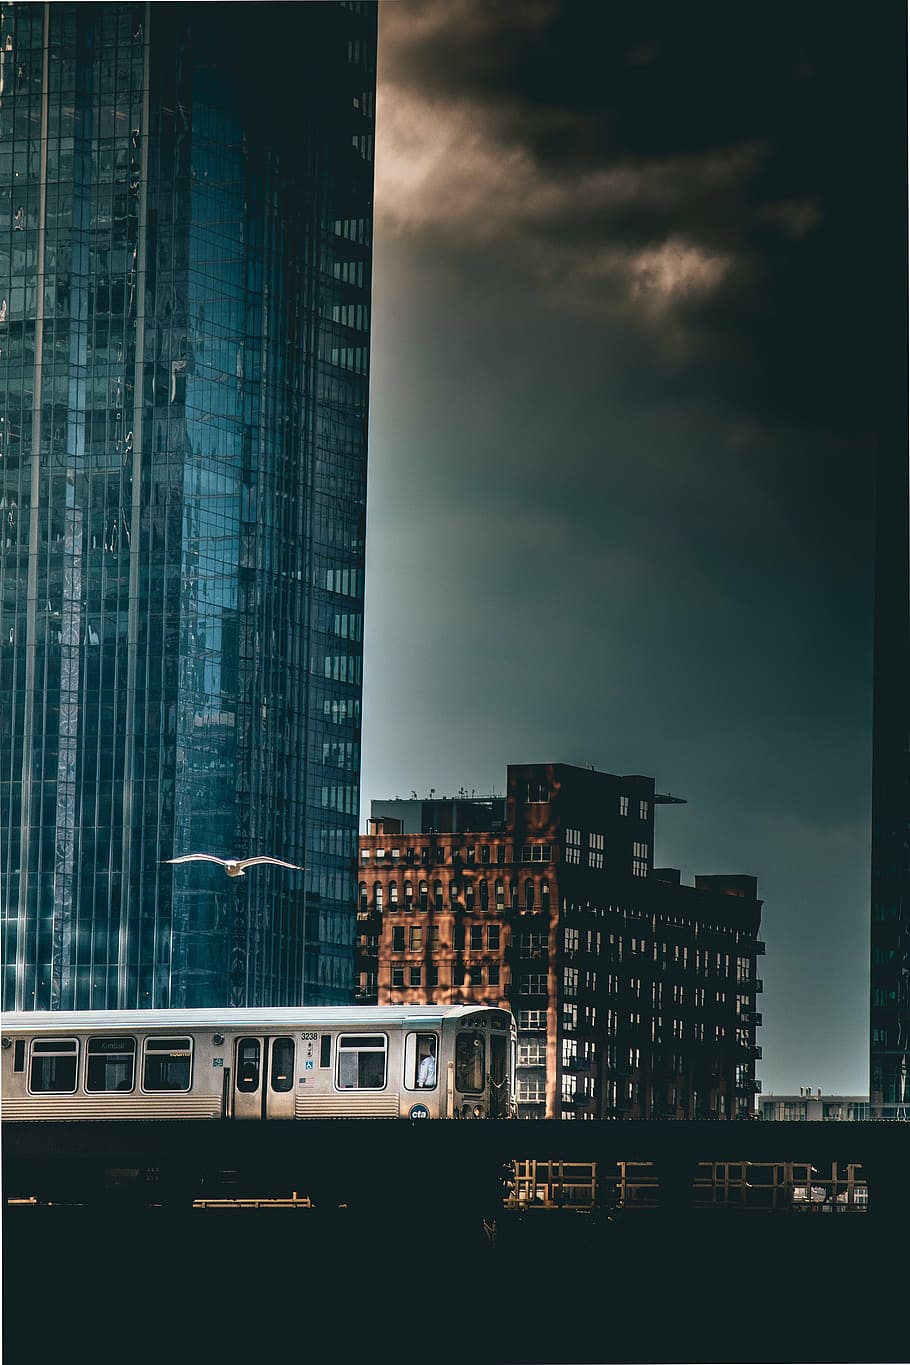 gray, bus, blue, glass building, thick, black, clouds, architecture, building, infrastructure